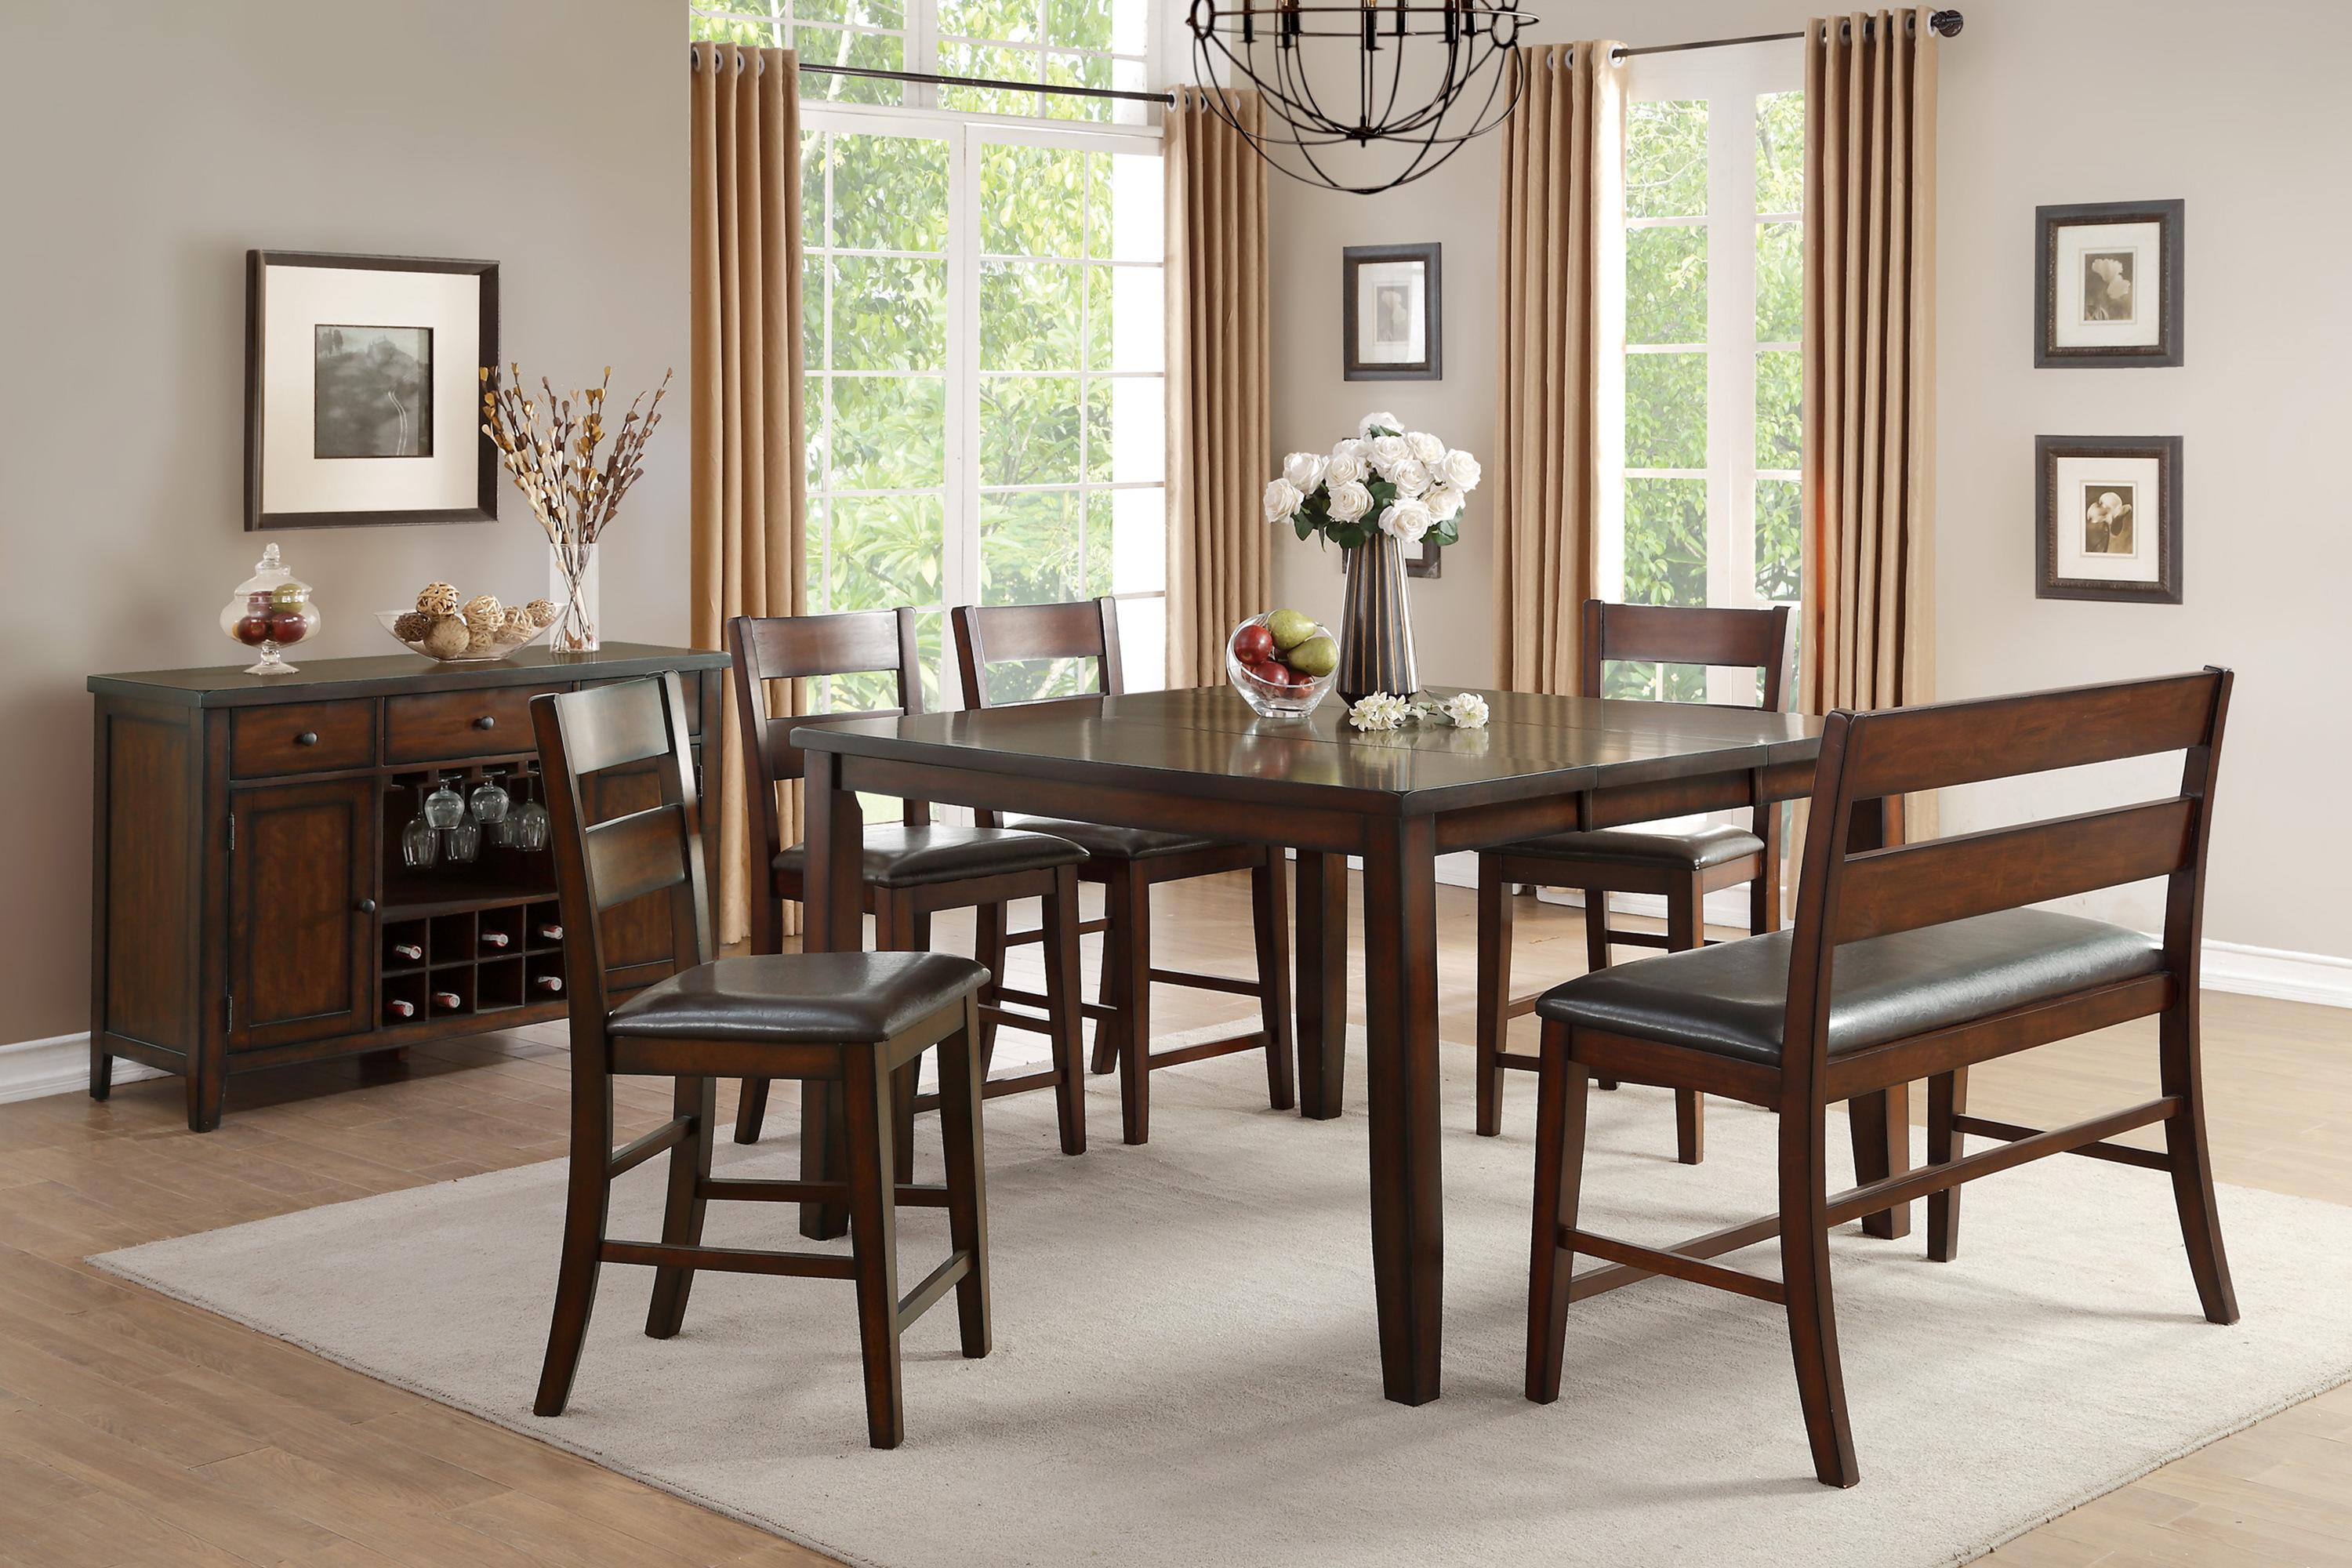 Transitional Dining Room Set 5547-36-6PC Mantello 5547-36-6PC in Cherry Faux Leather